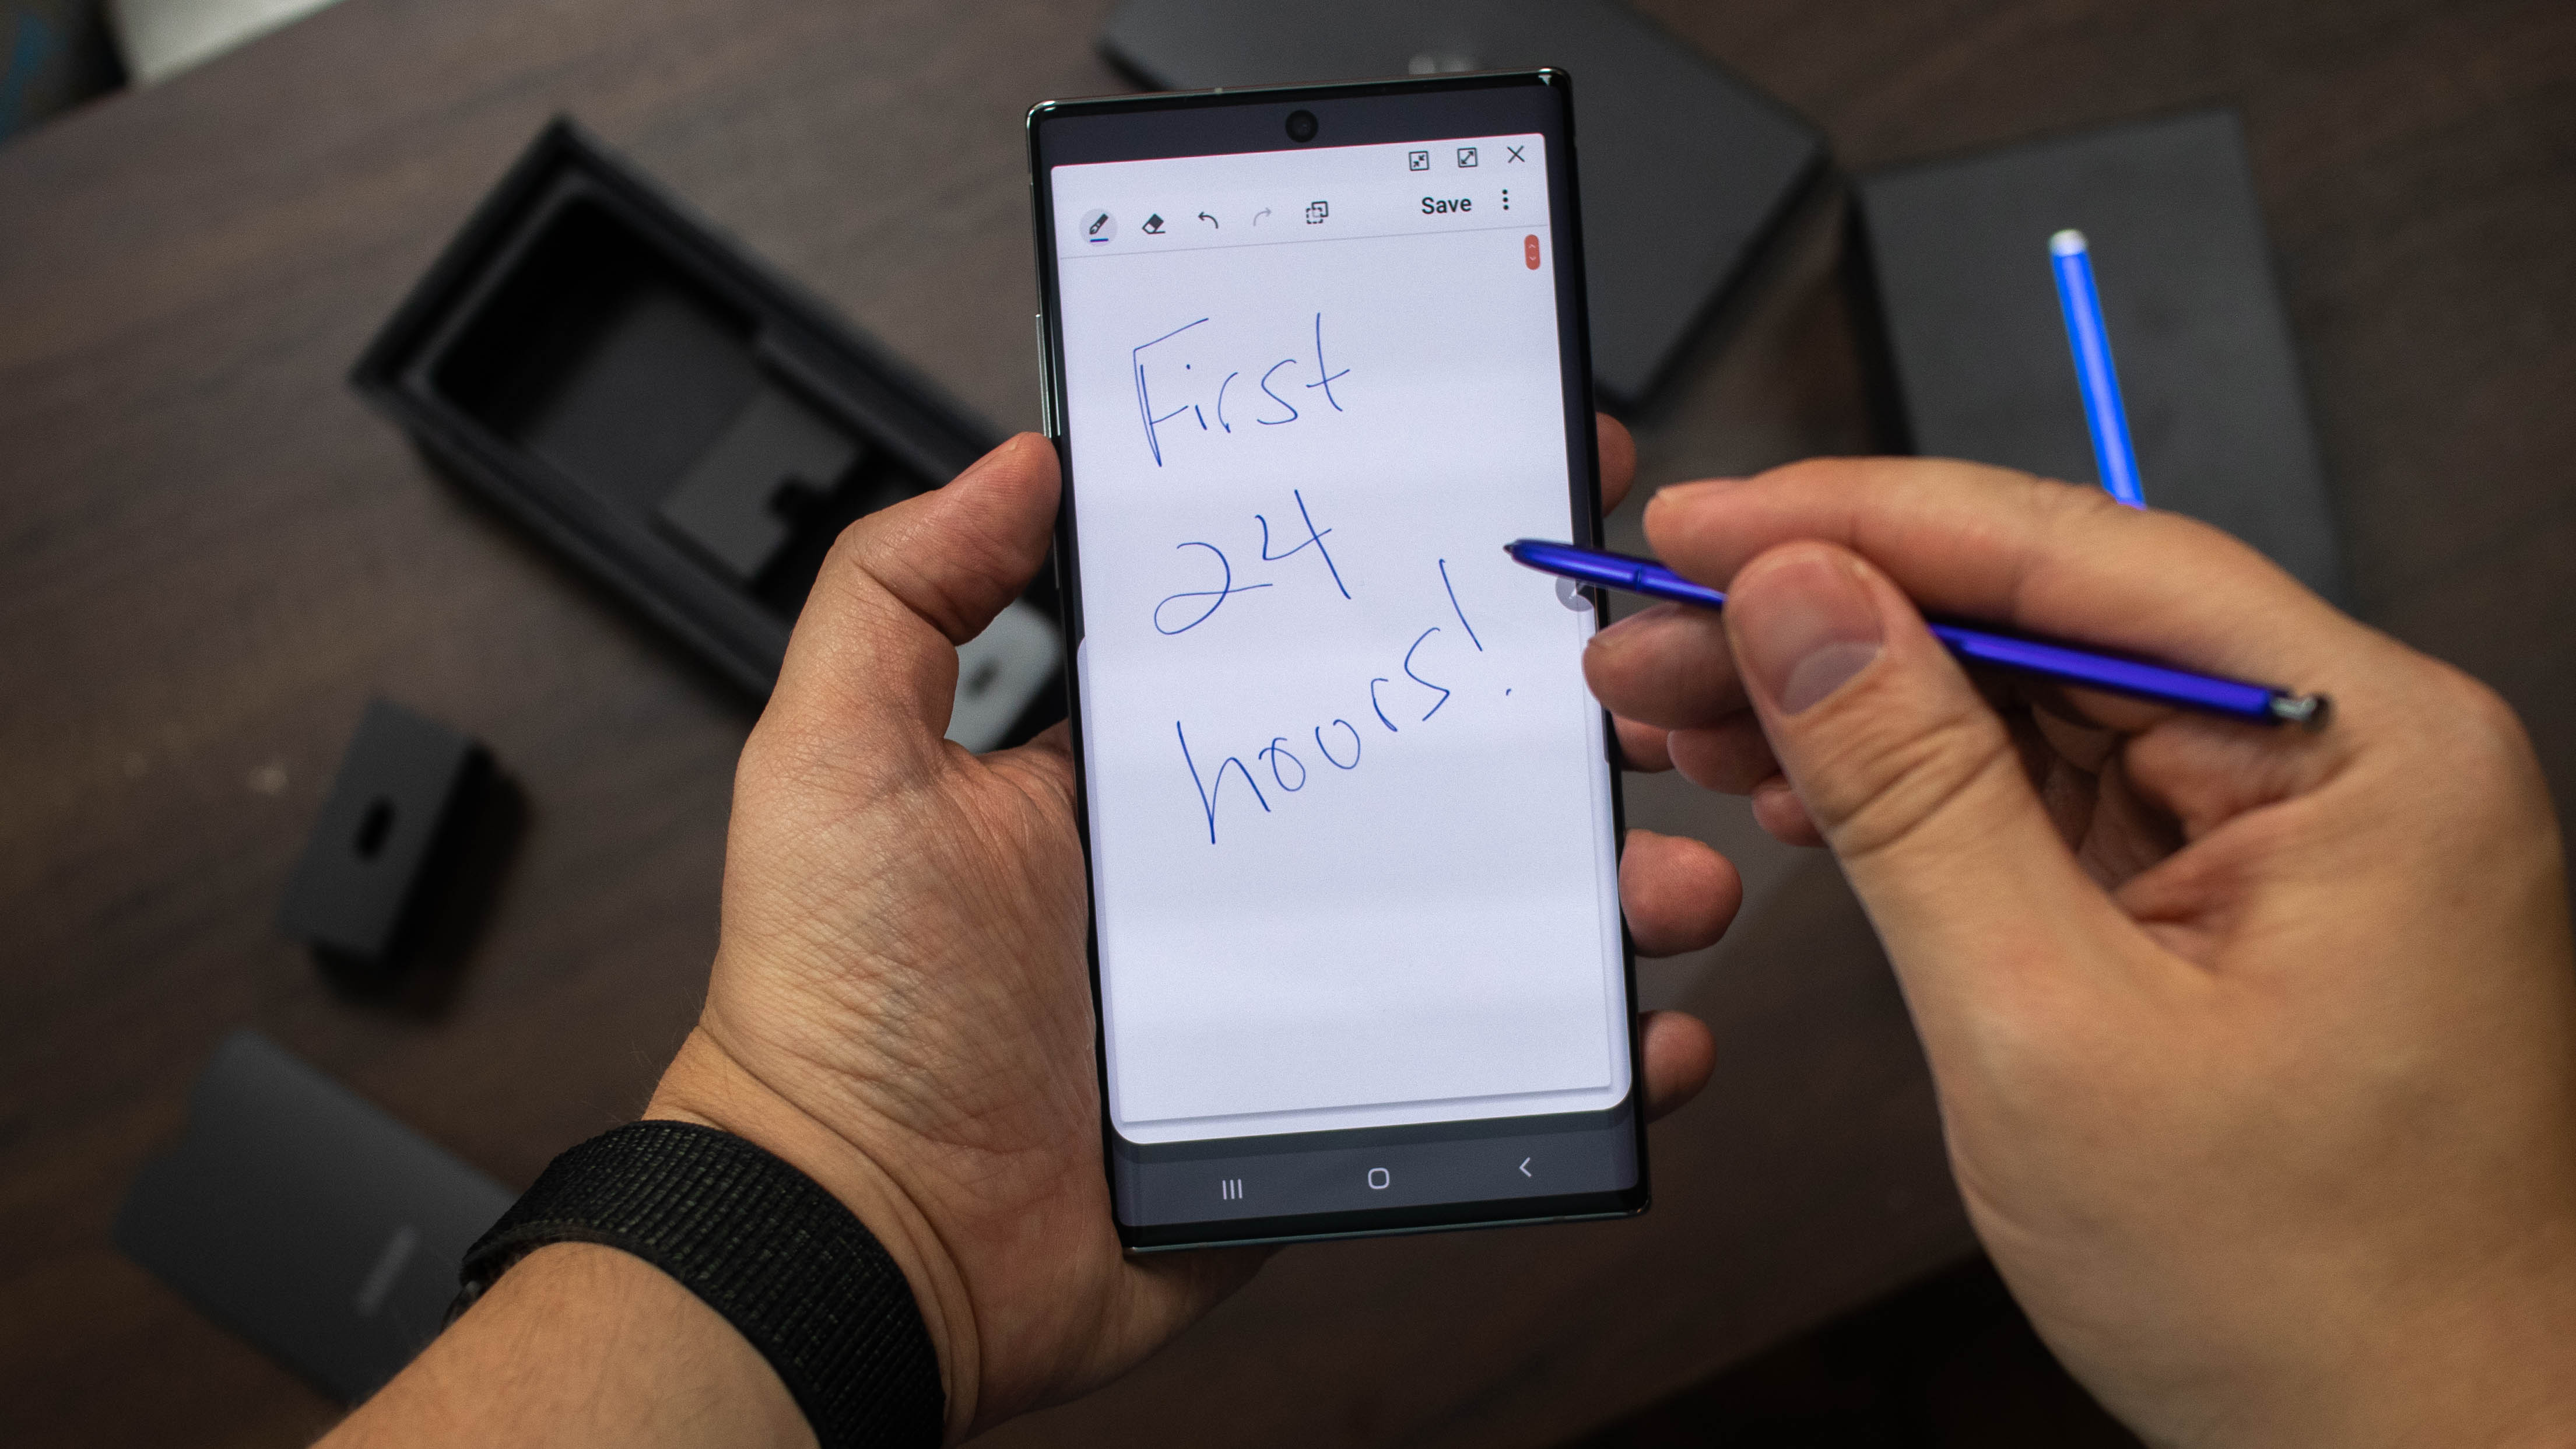 Samsung Galaxy Note 10 Plus unboxing and first 48 hours